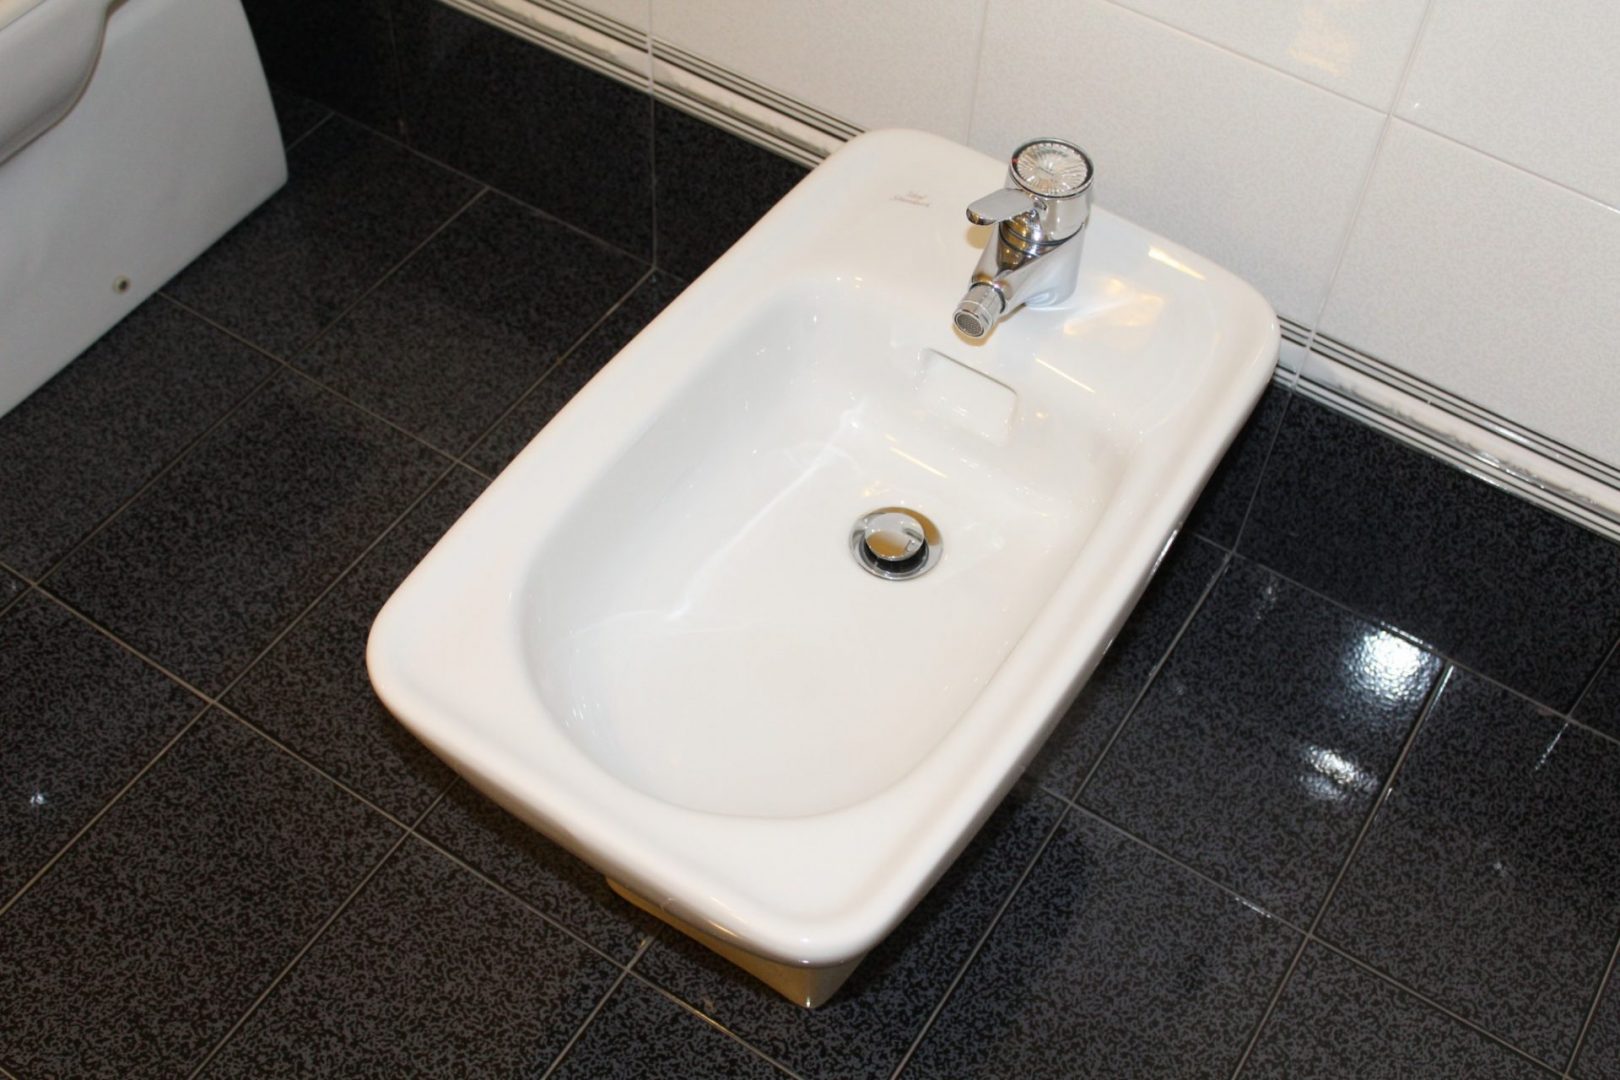 Beehive Plumbing's bidet services help countless homeowners with hygiene and many other benefits